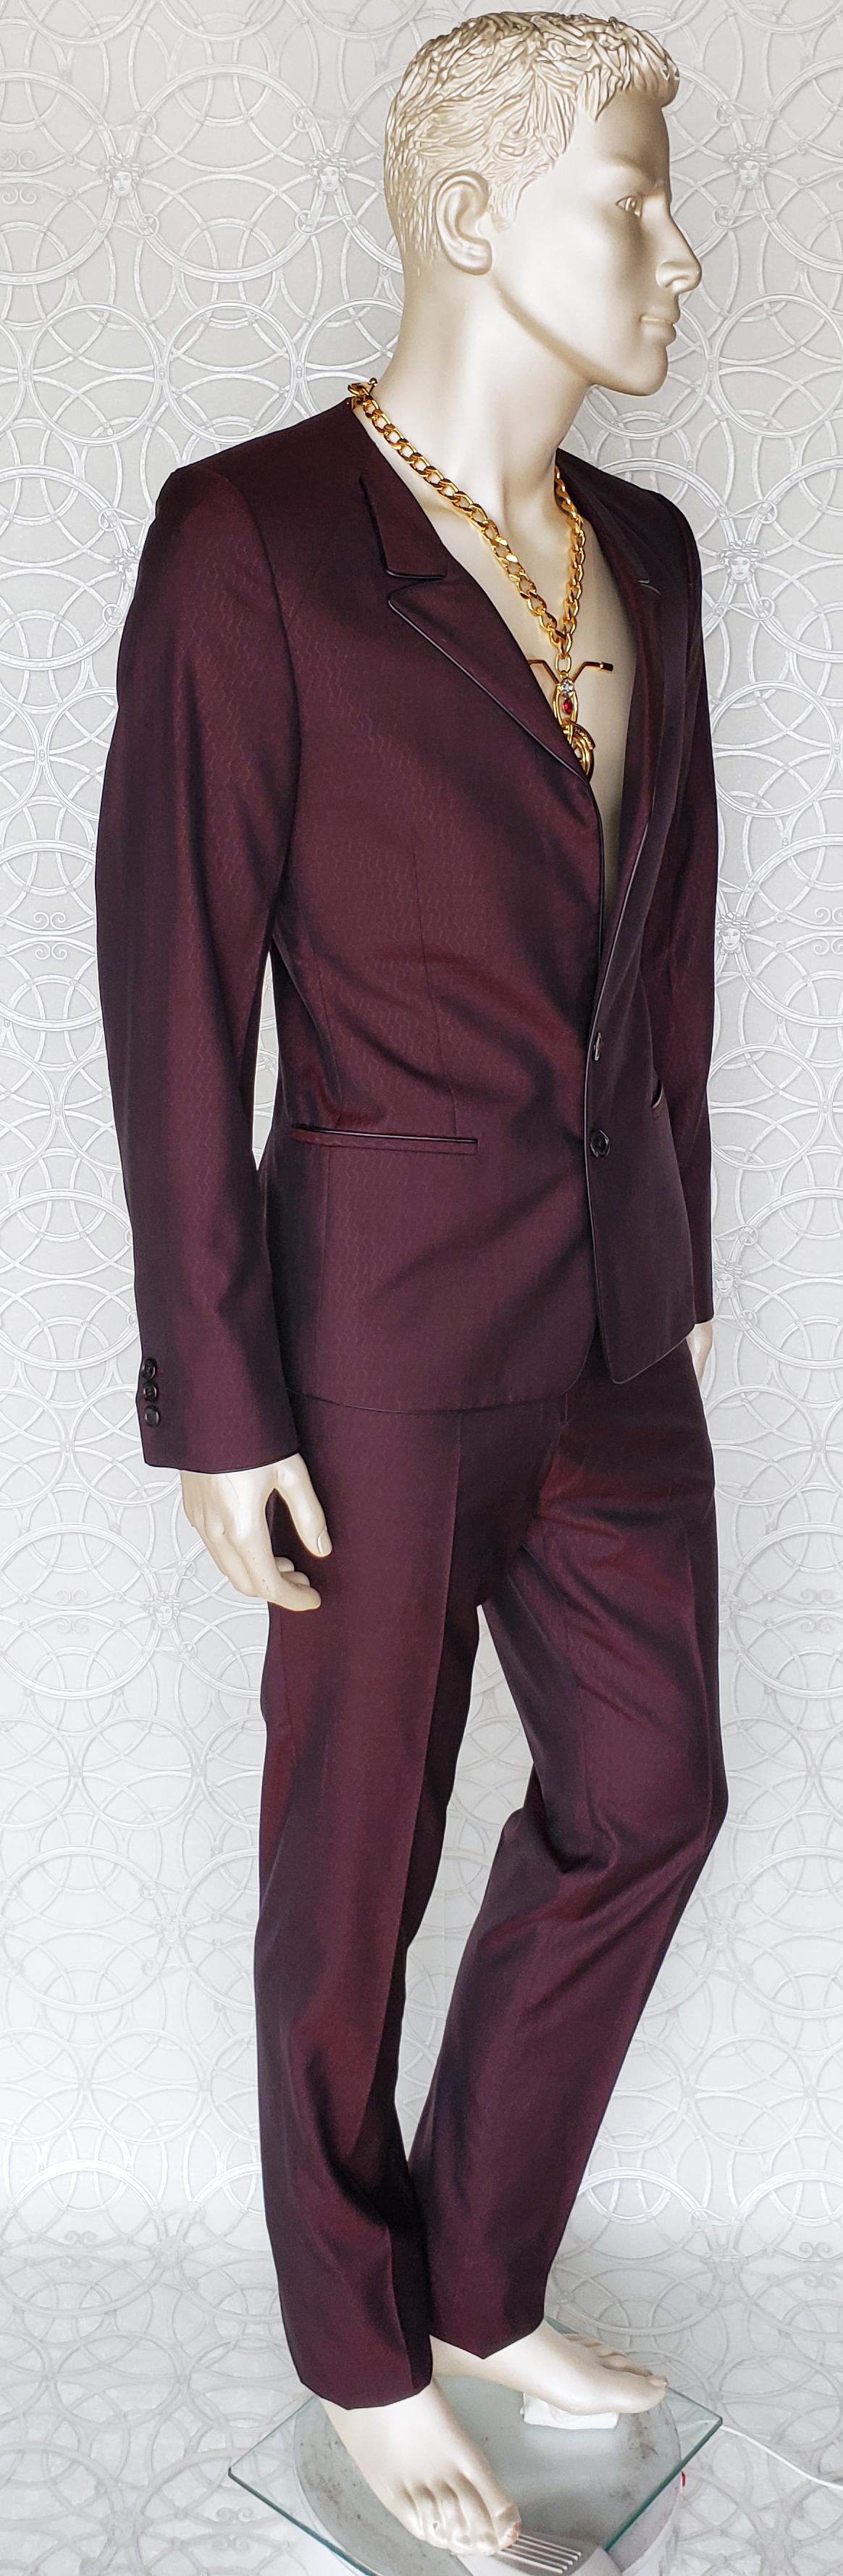 S/S 2011 look #19 NEW VERSACE BURGUNDY WOOL and SILK SUIT 48 - 38 (M) For Sale 2